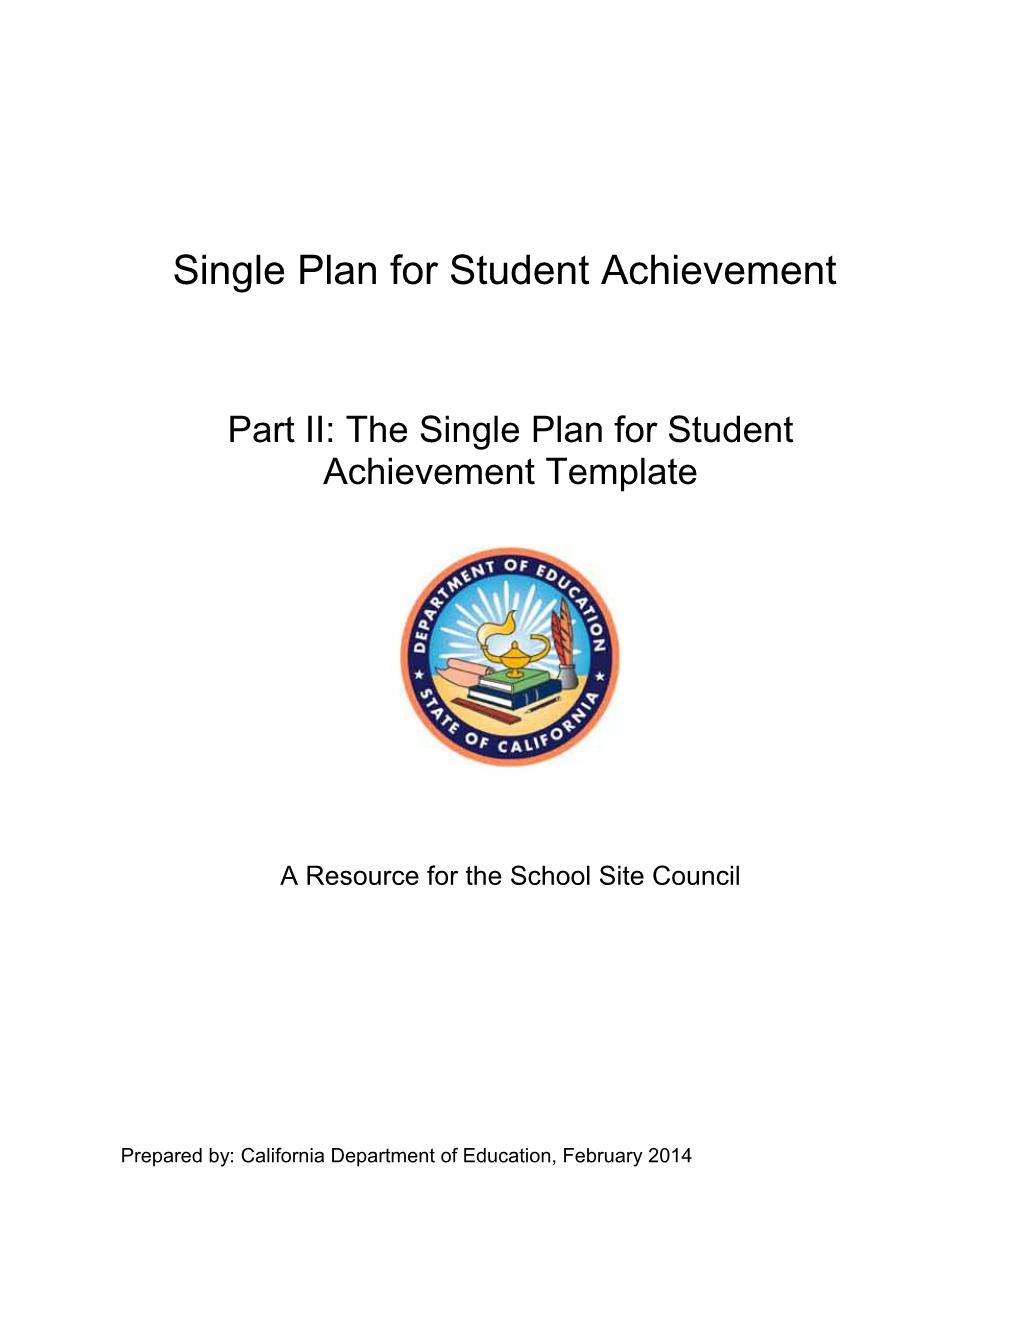 Single Plan for Student Achievement-Part II - Local Educational Agency Plan (CA Dept Of